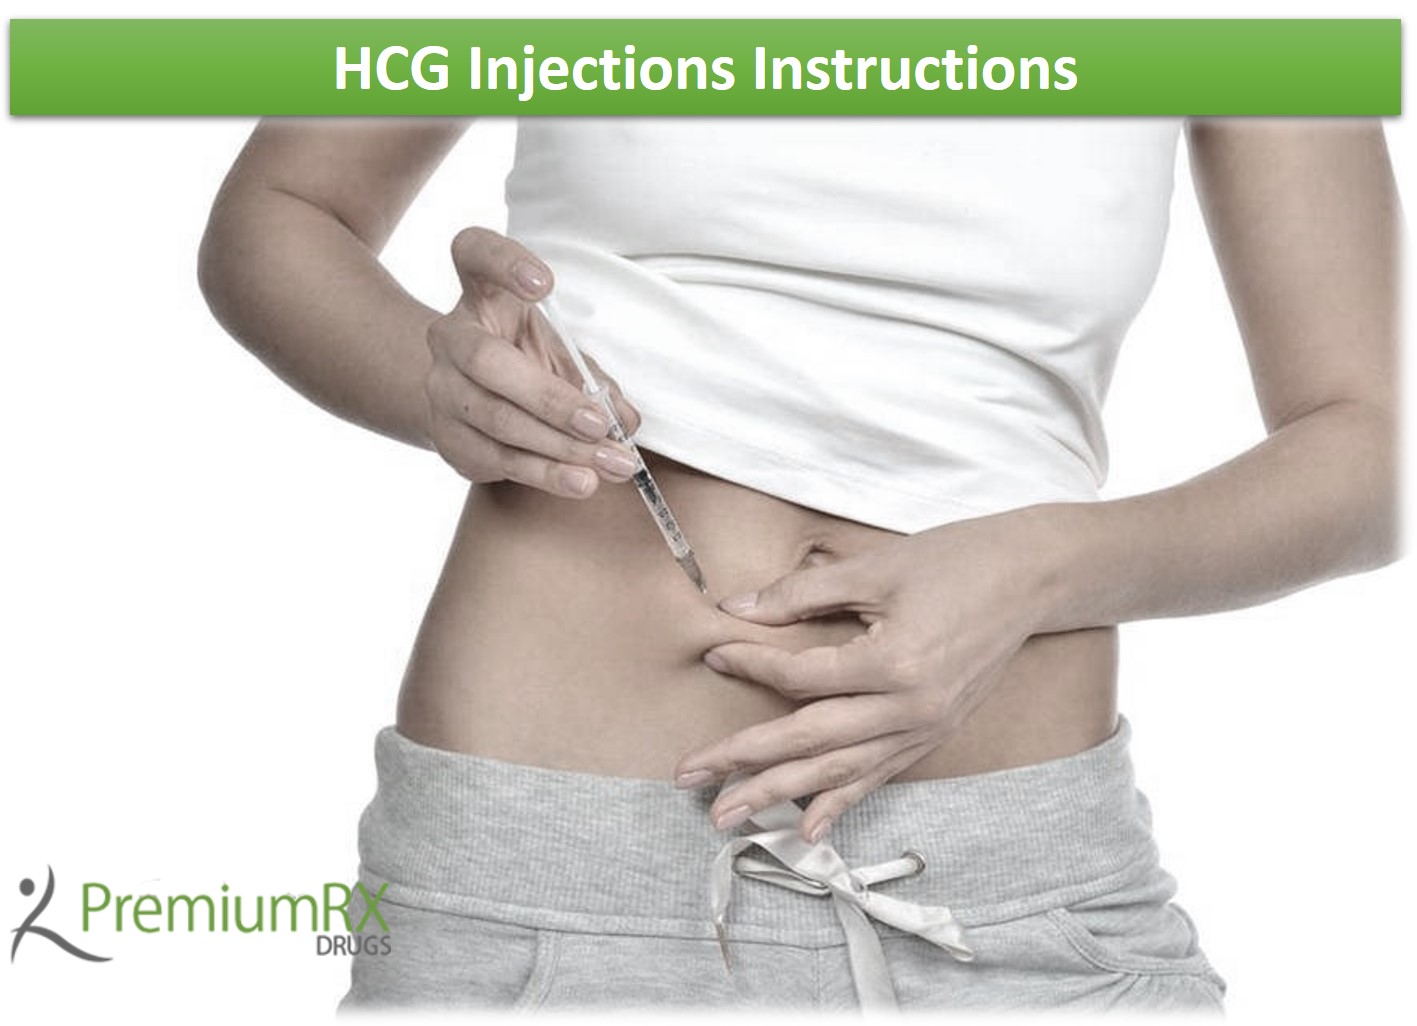 HCG Injections Instructions